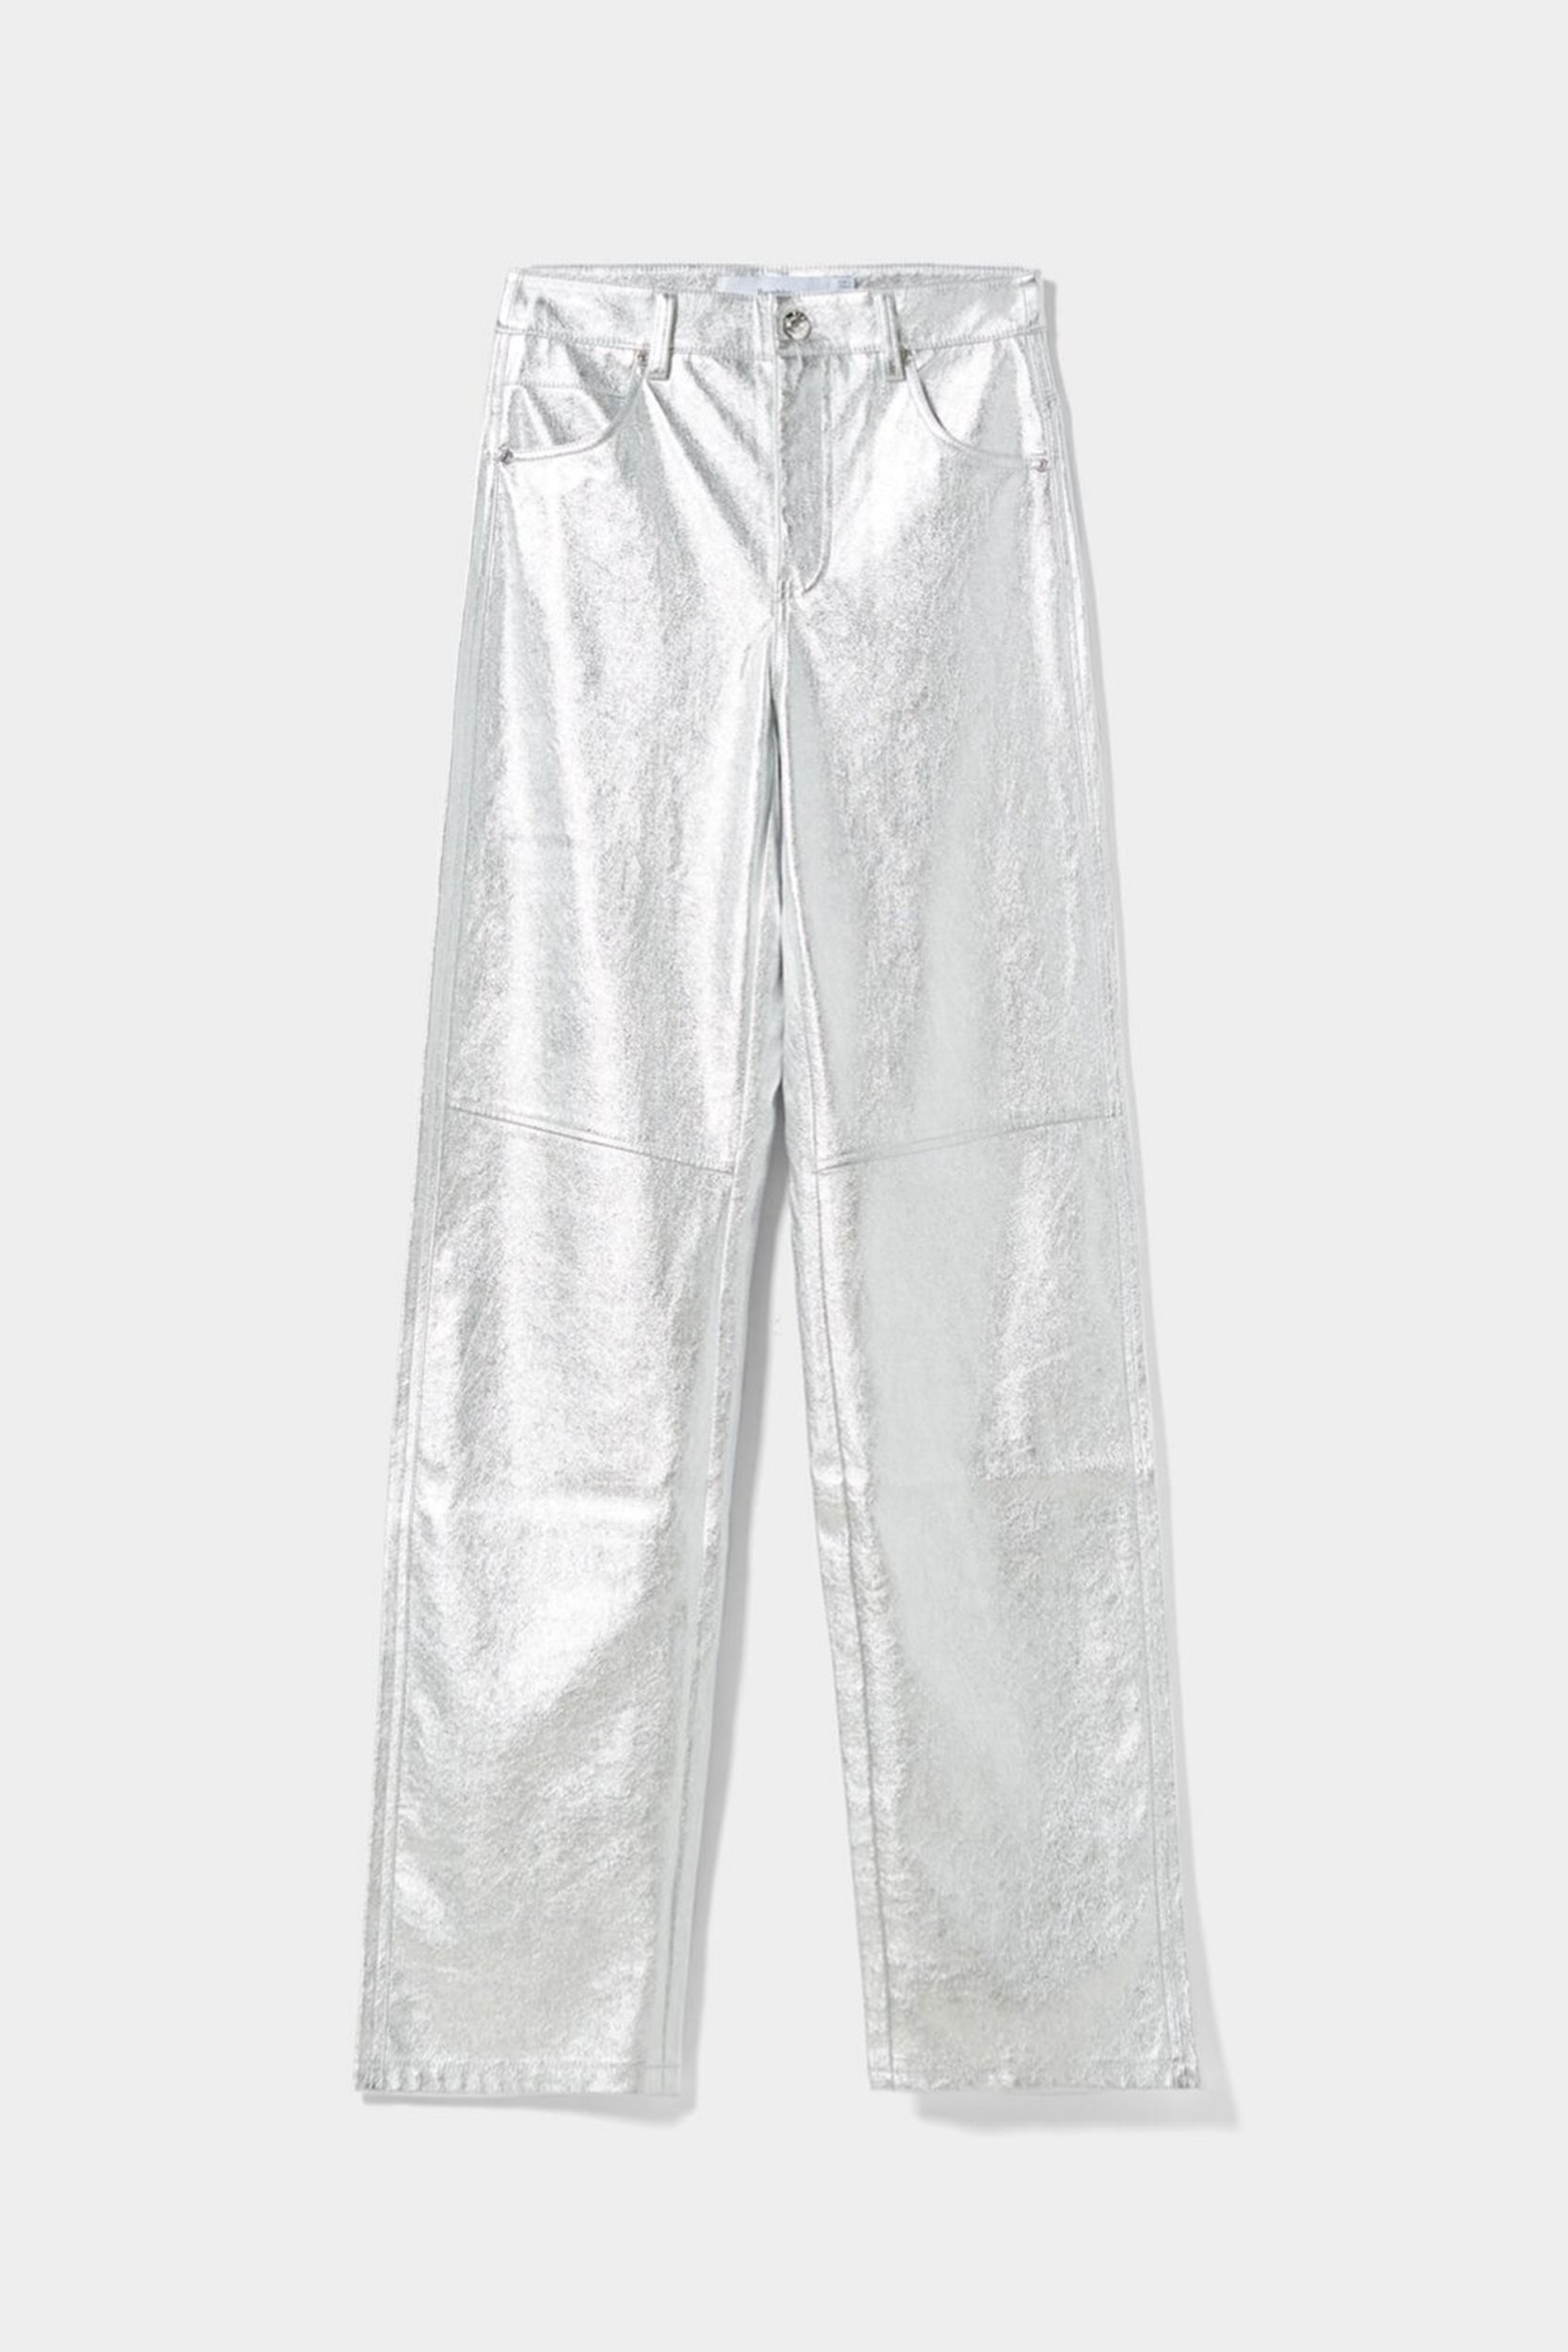 The Statement Trousers On The High Street To Snap Up For Party Season